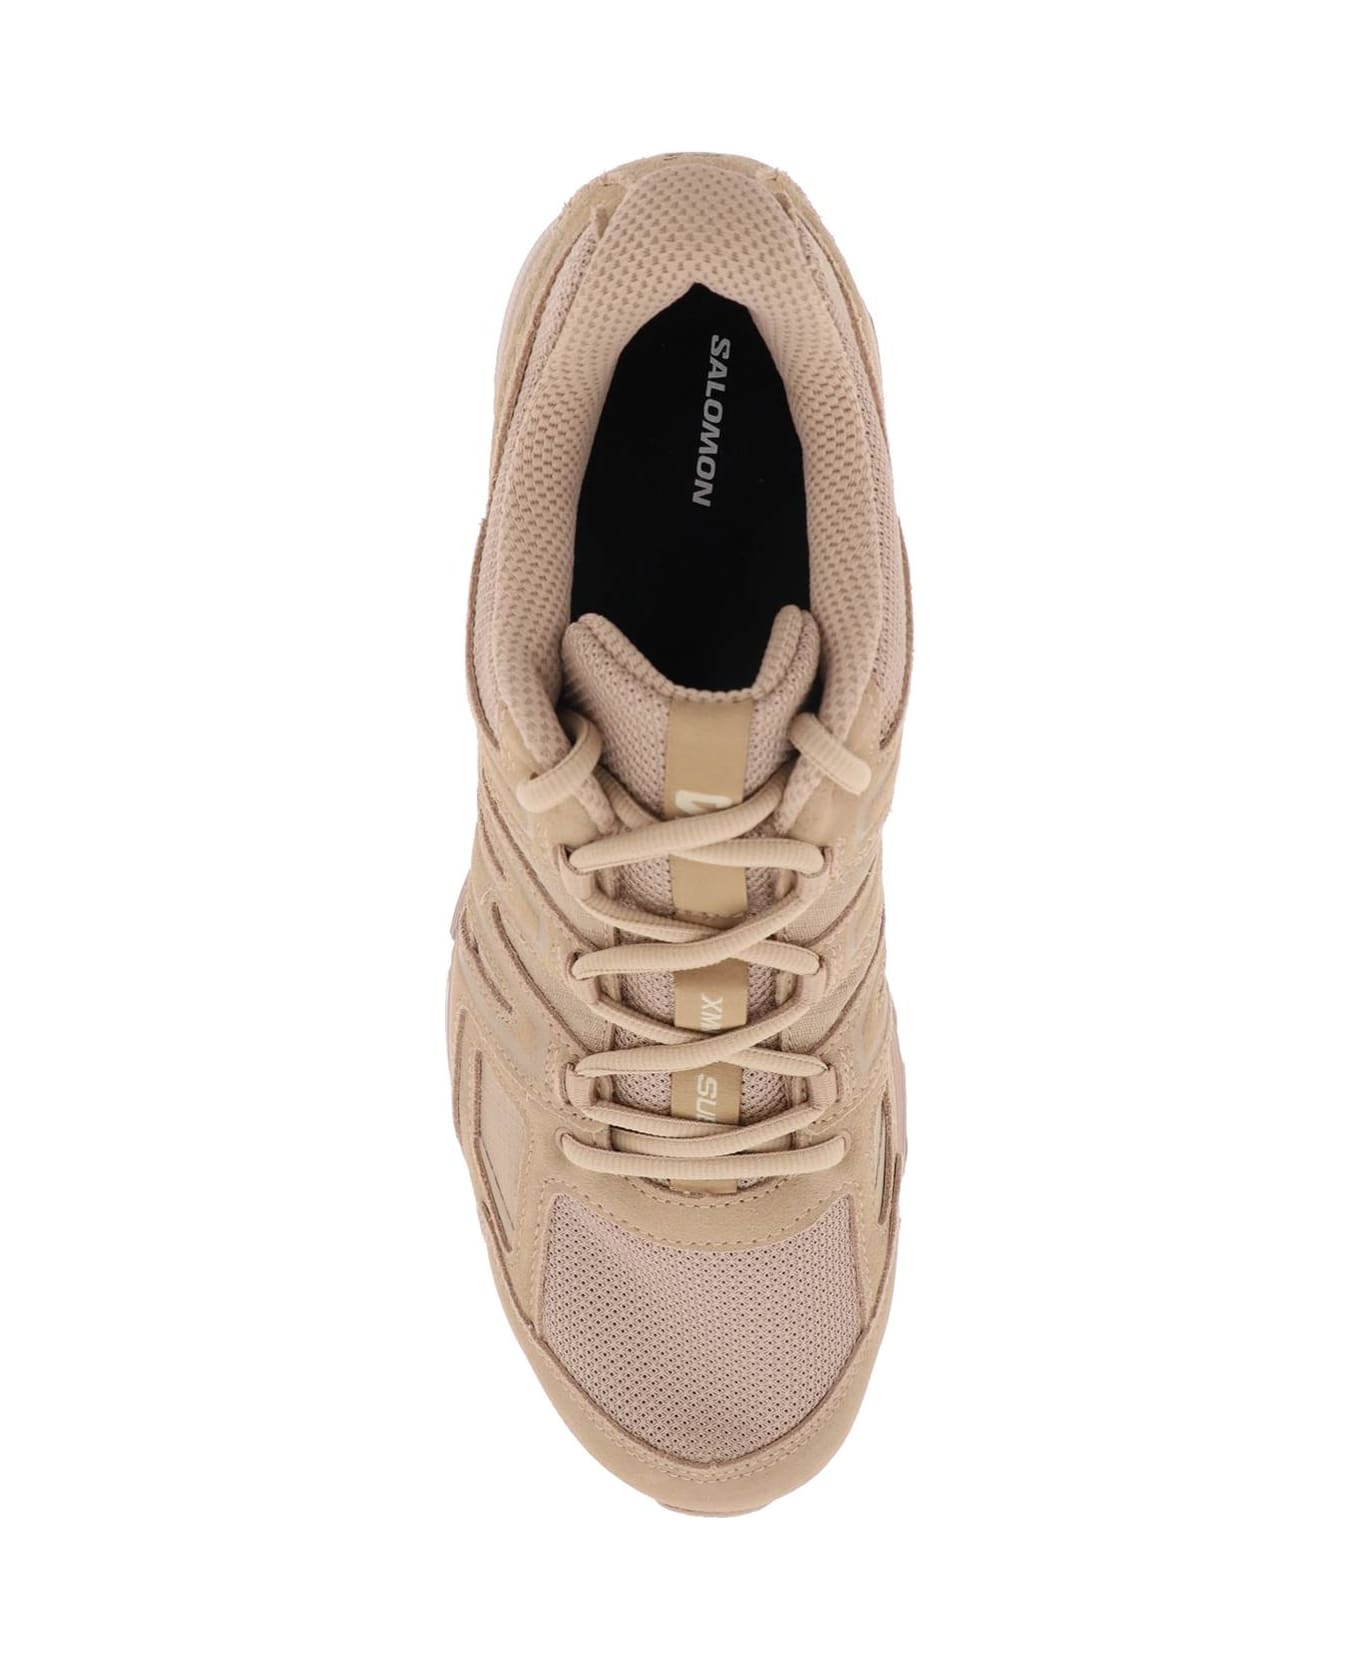 Salomon X-mission 4 Suede Sneakers - NATURAL NATURAL NATURAL (Pink)